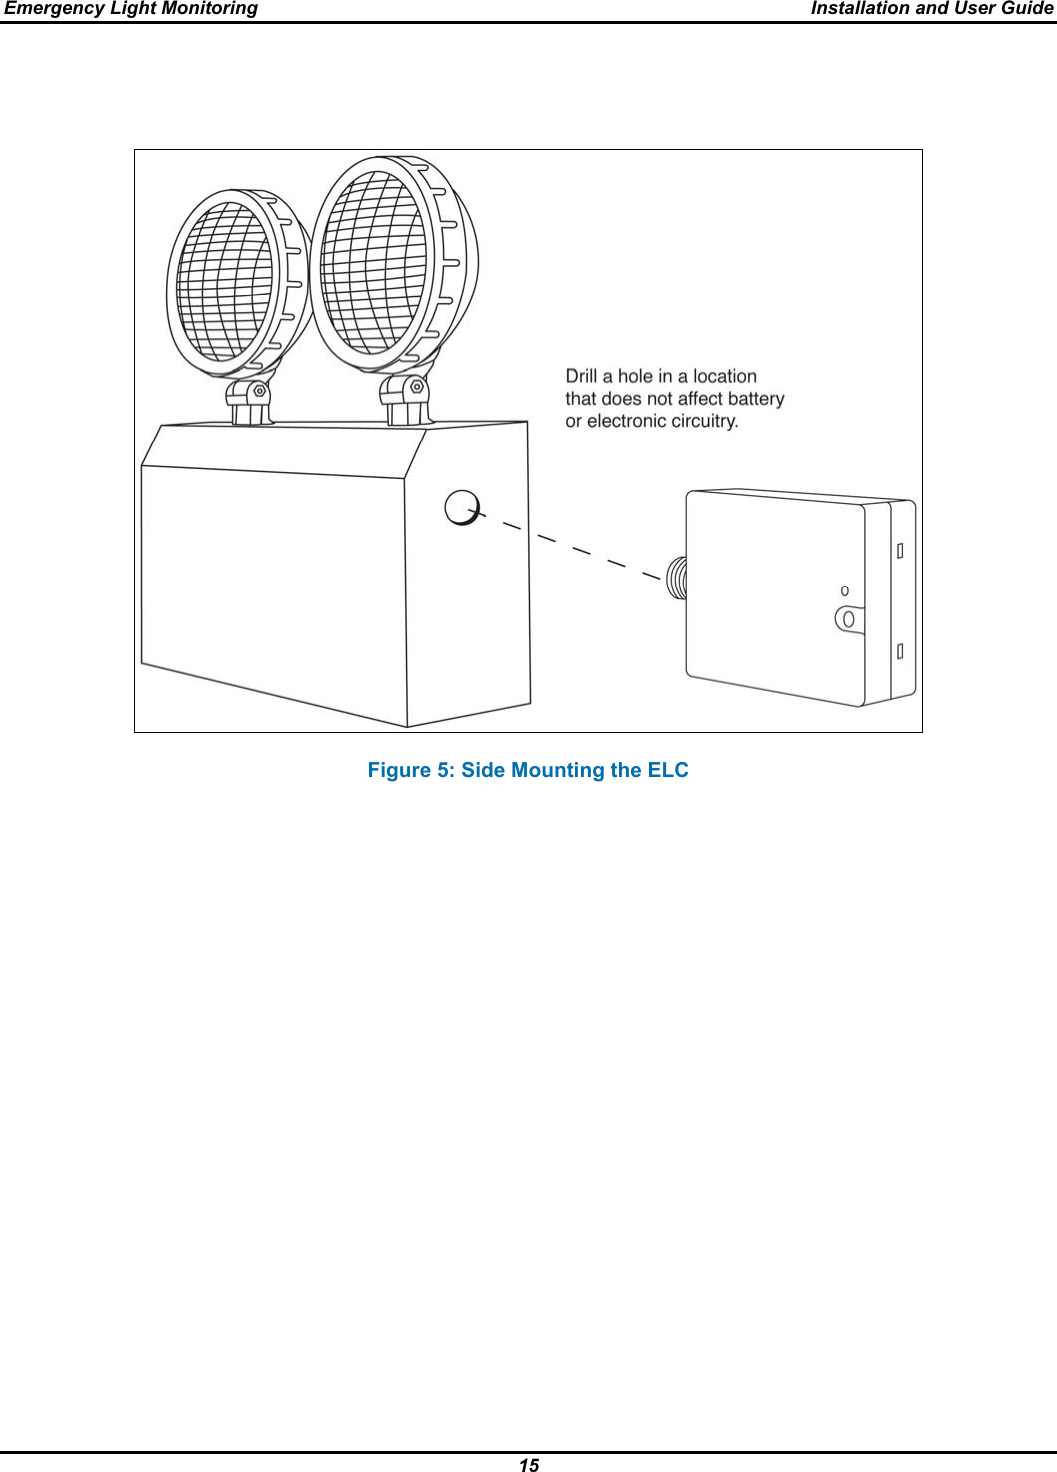 Emergency Light Monitoring  Installation and User Guide 15      Figure 5: Side Mounting the ELC                                               